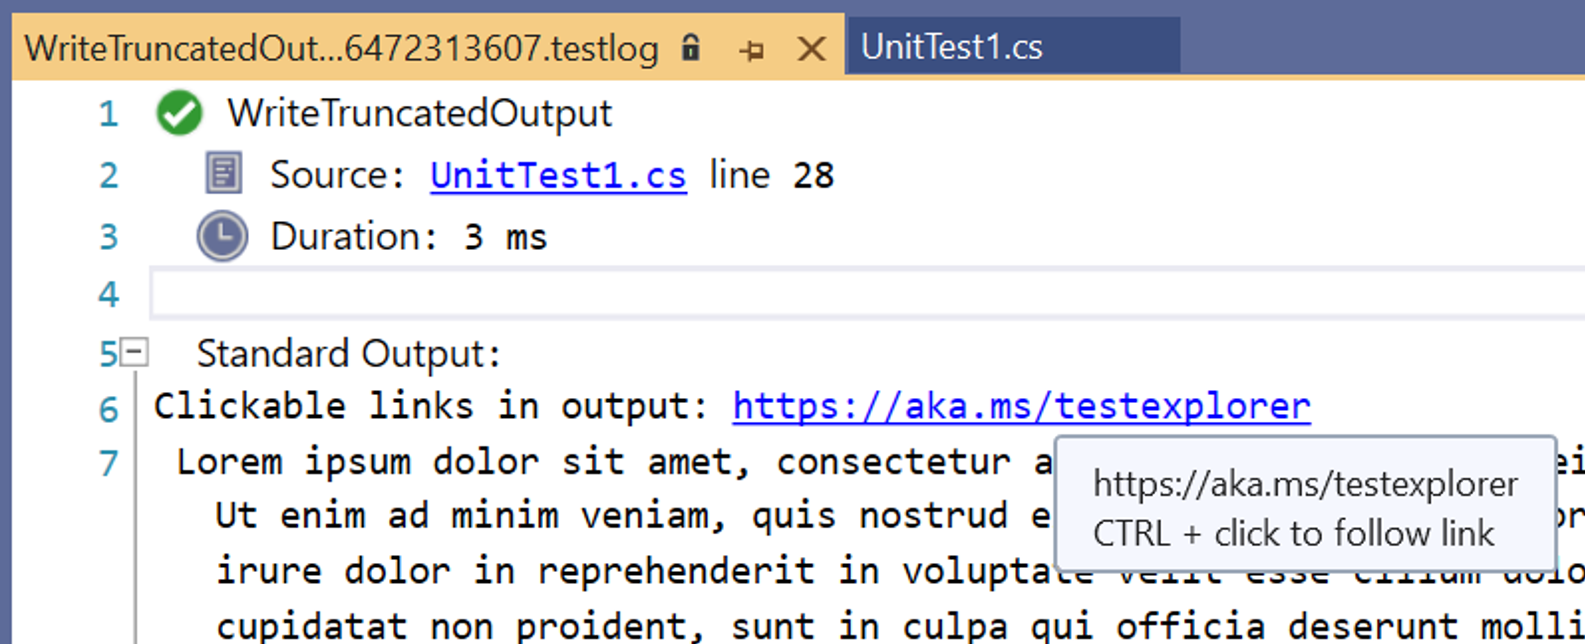 Test logs also preserve hyperlinks and stacktraces